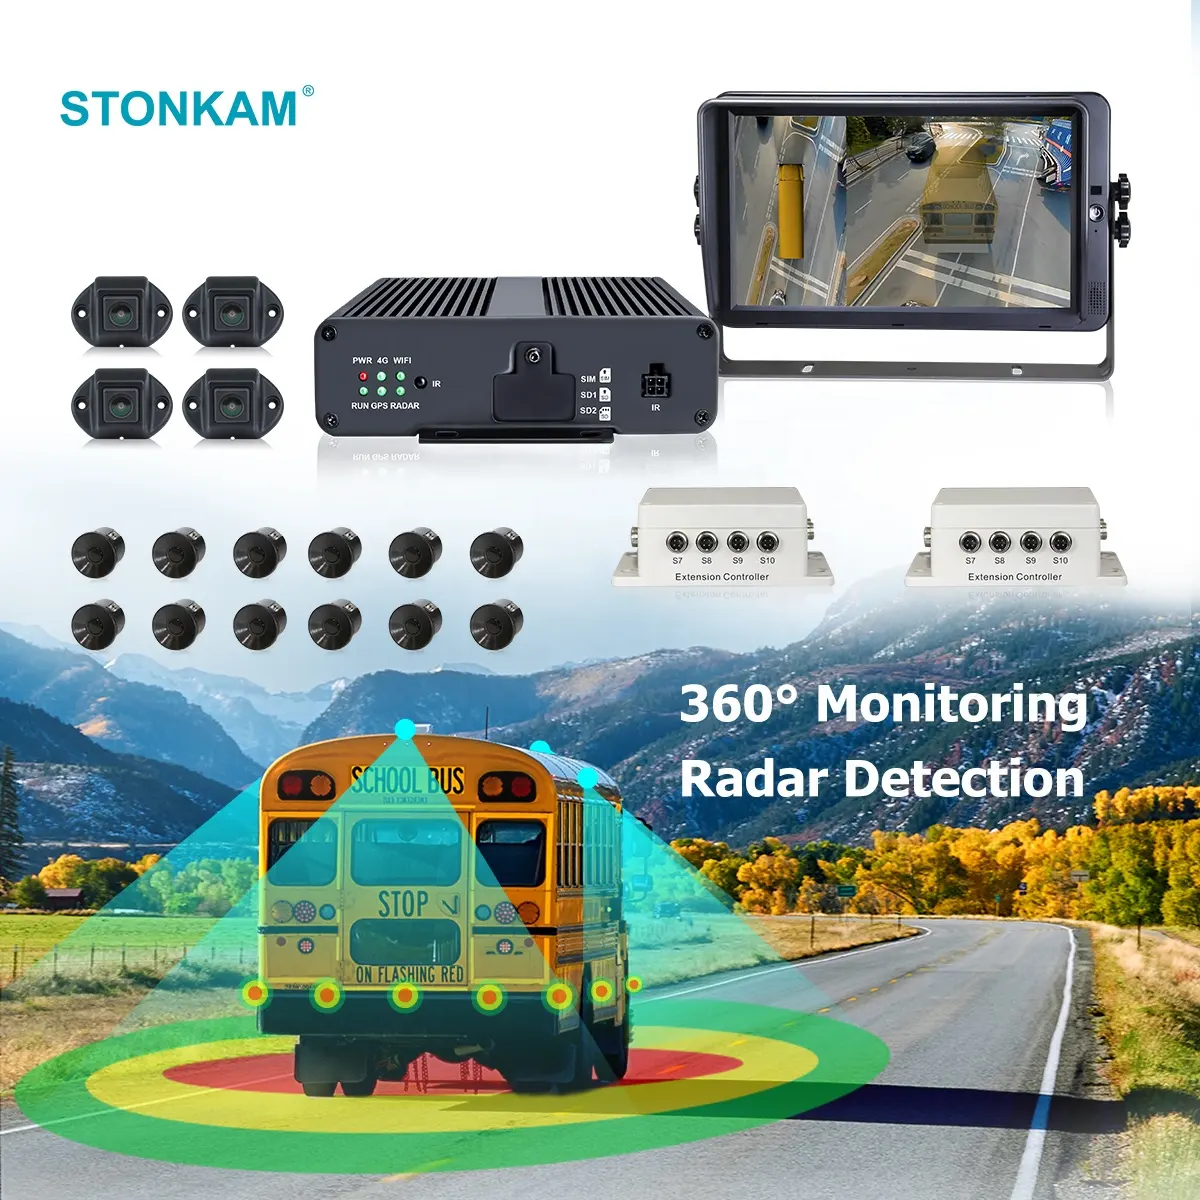 STONKAM 360 Surround View Monitoring System Bird Eye View Panorama System 4 Car Camera with 4CH 1080P / 30fps Recording